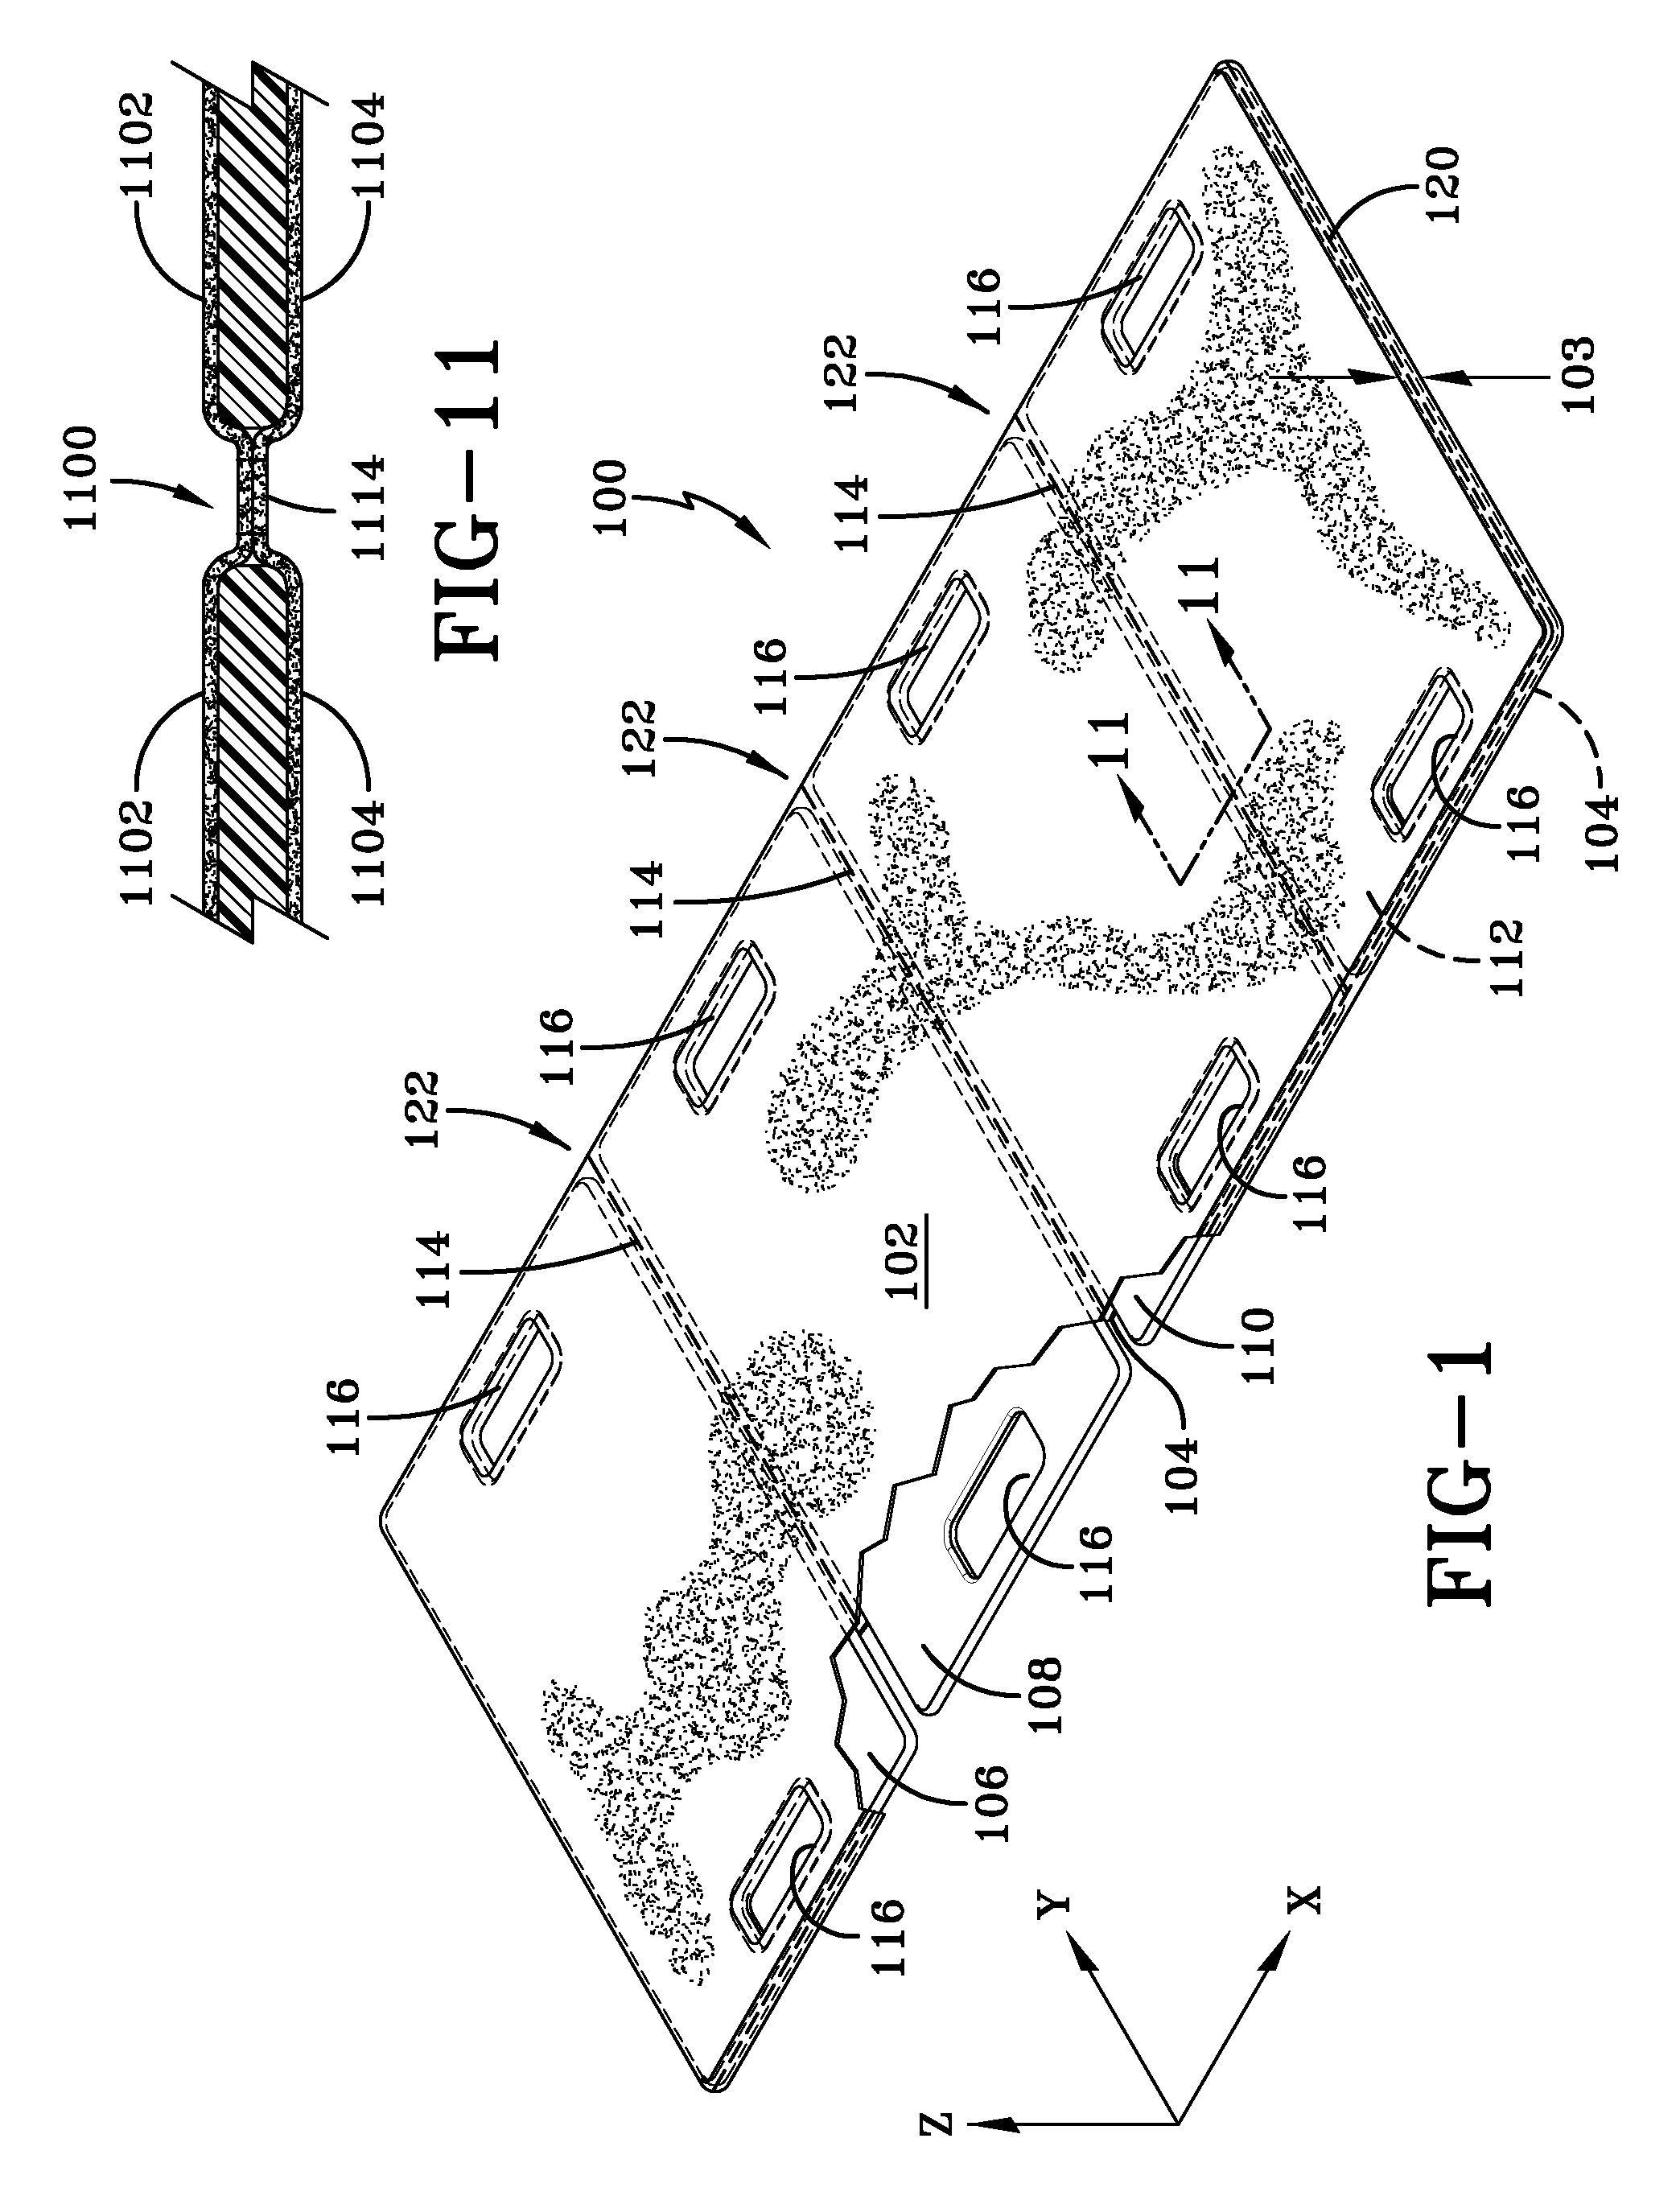 Folding apparatus for transferring a patient